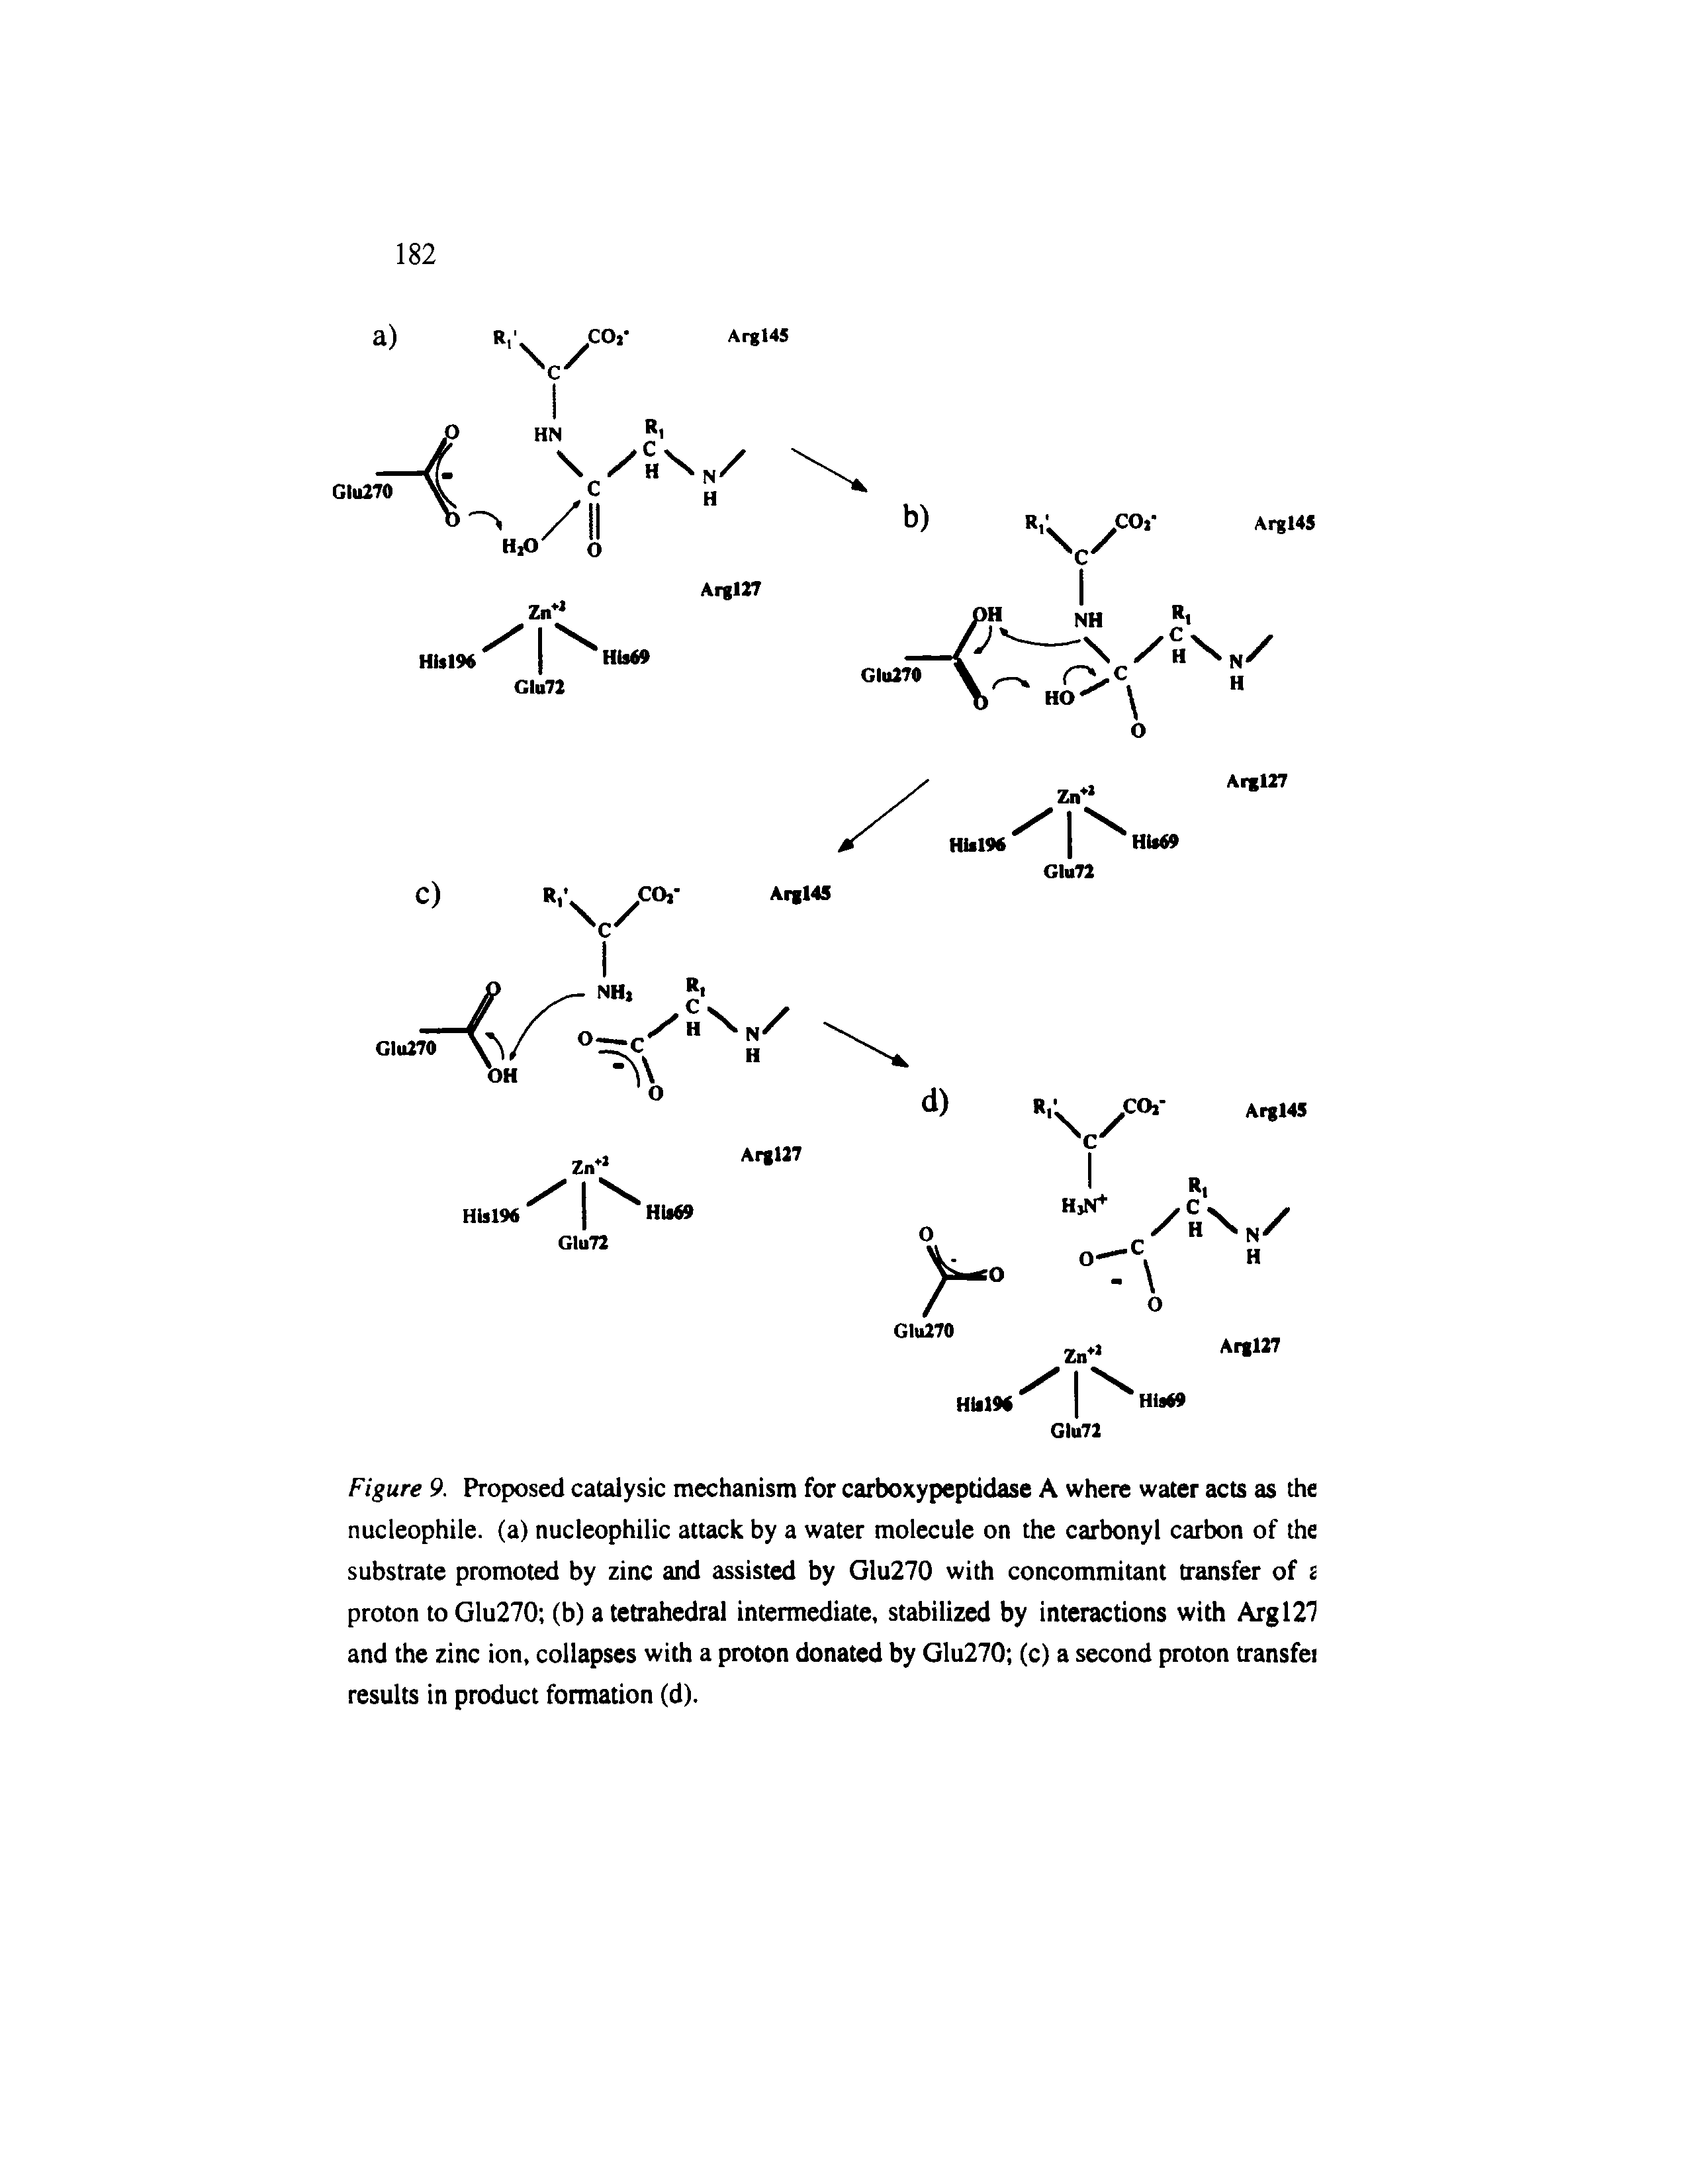 Figure 9. Proposed catalysic mechanism for carboxypeptidase A where water acts as the nucleophile, (a) nucleophilic attack by a water molecule on the carbonyl carbon of the substrate promoted by zinc and assisted by Glu270 with concommitant transfer of i proton to Glu270 (b) a tetrahedral intermediate, stabilized by interactions with Argl27 and the zinc ion, collapses with a proton donated by Glu270 (c) a second proton transfei results in product formation (d).